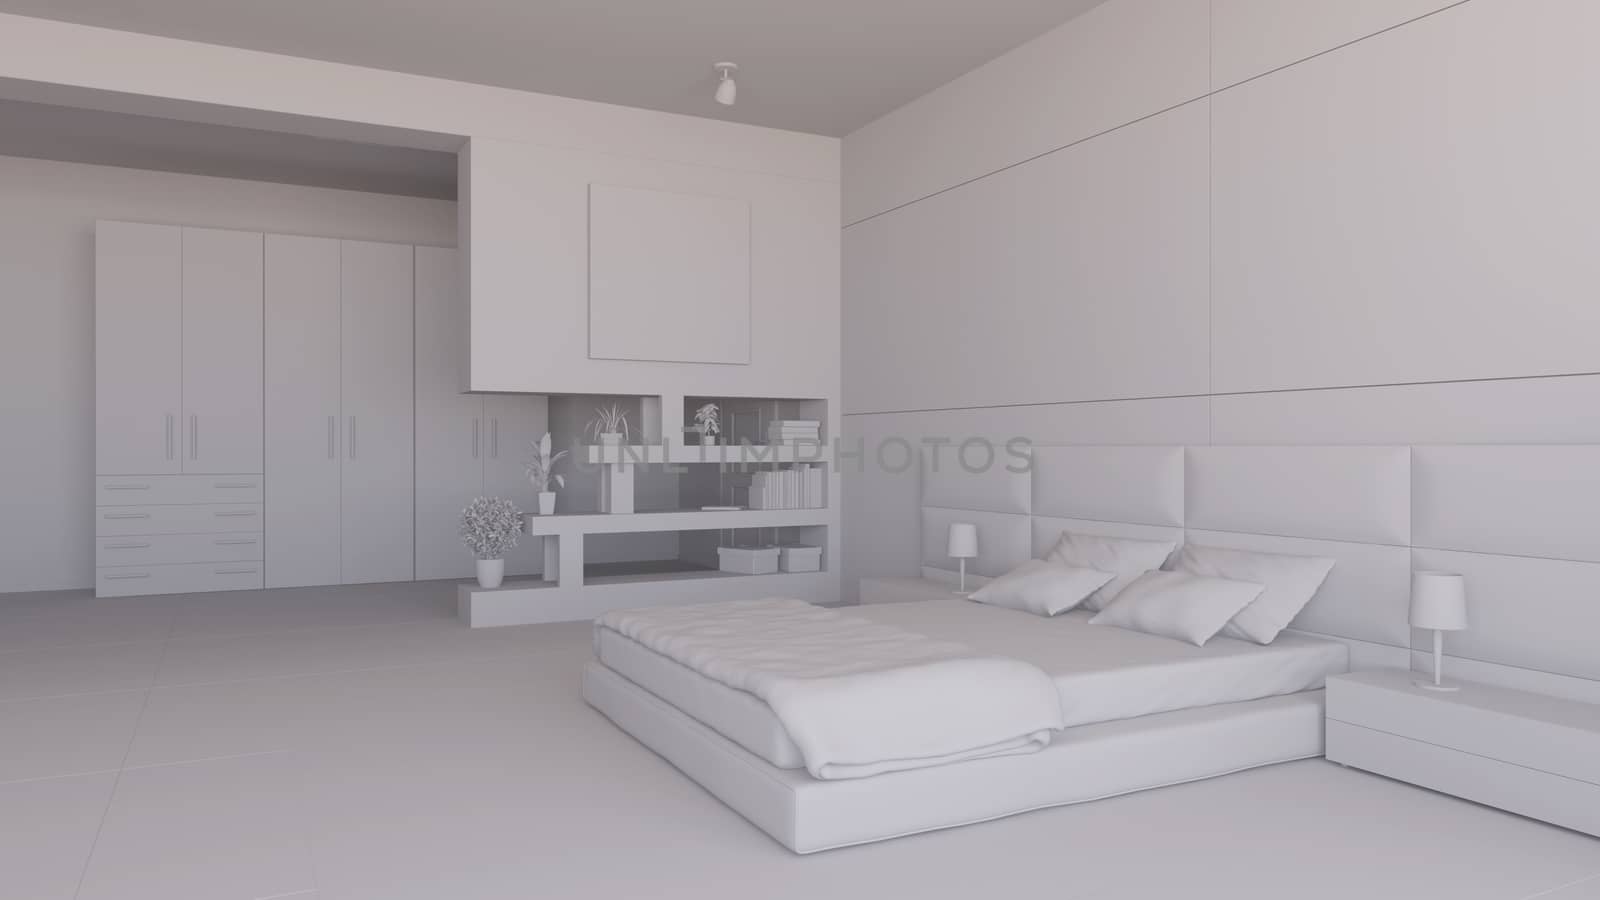 Interior render of a bedroom with some furinitures by enrico.lapponi